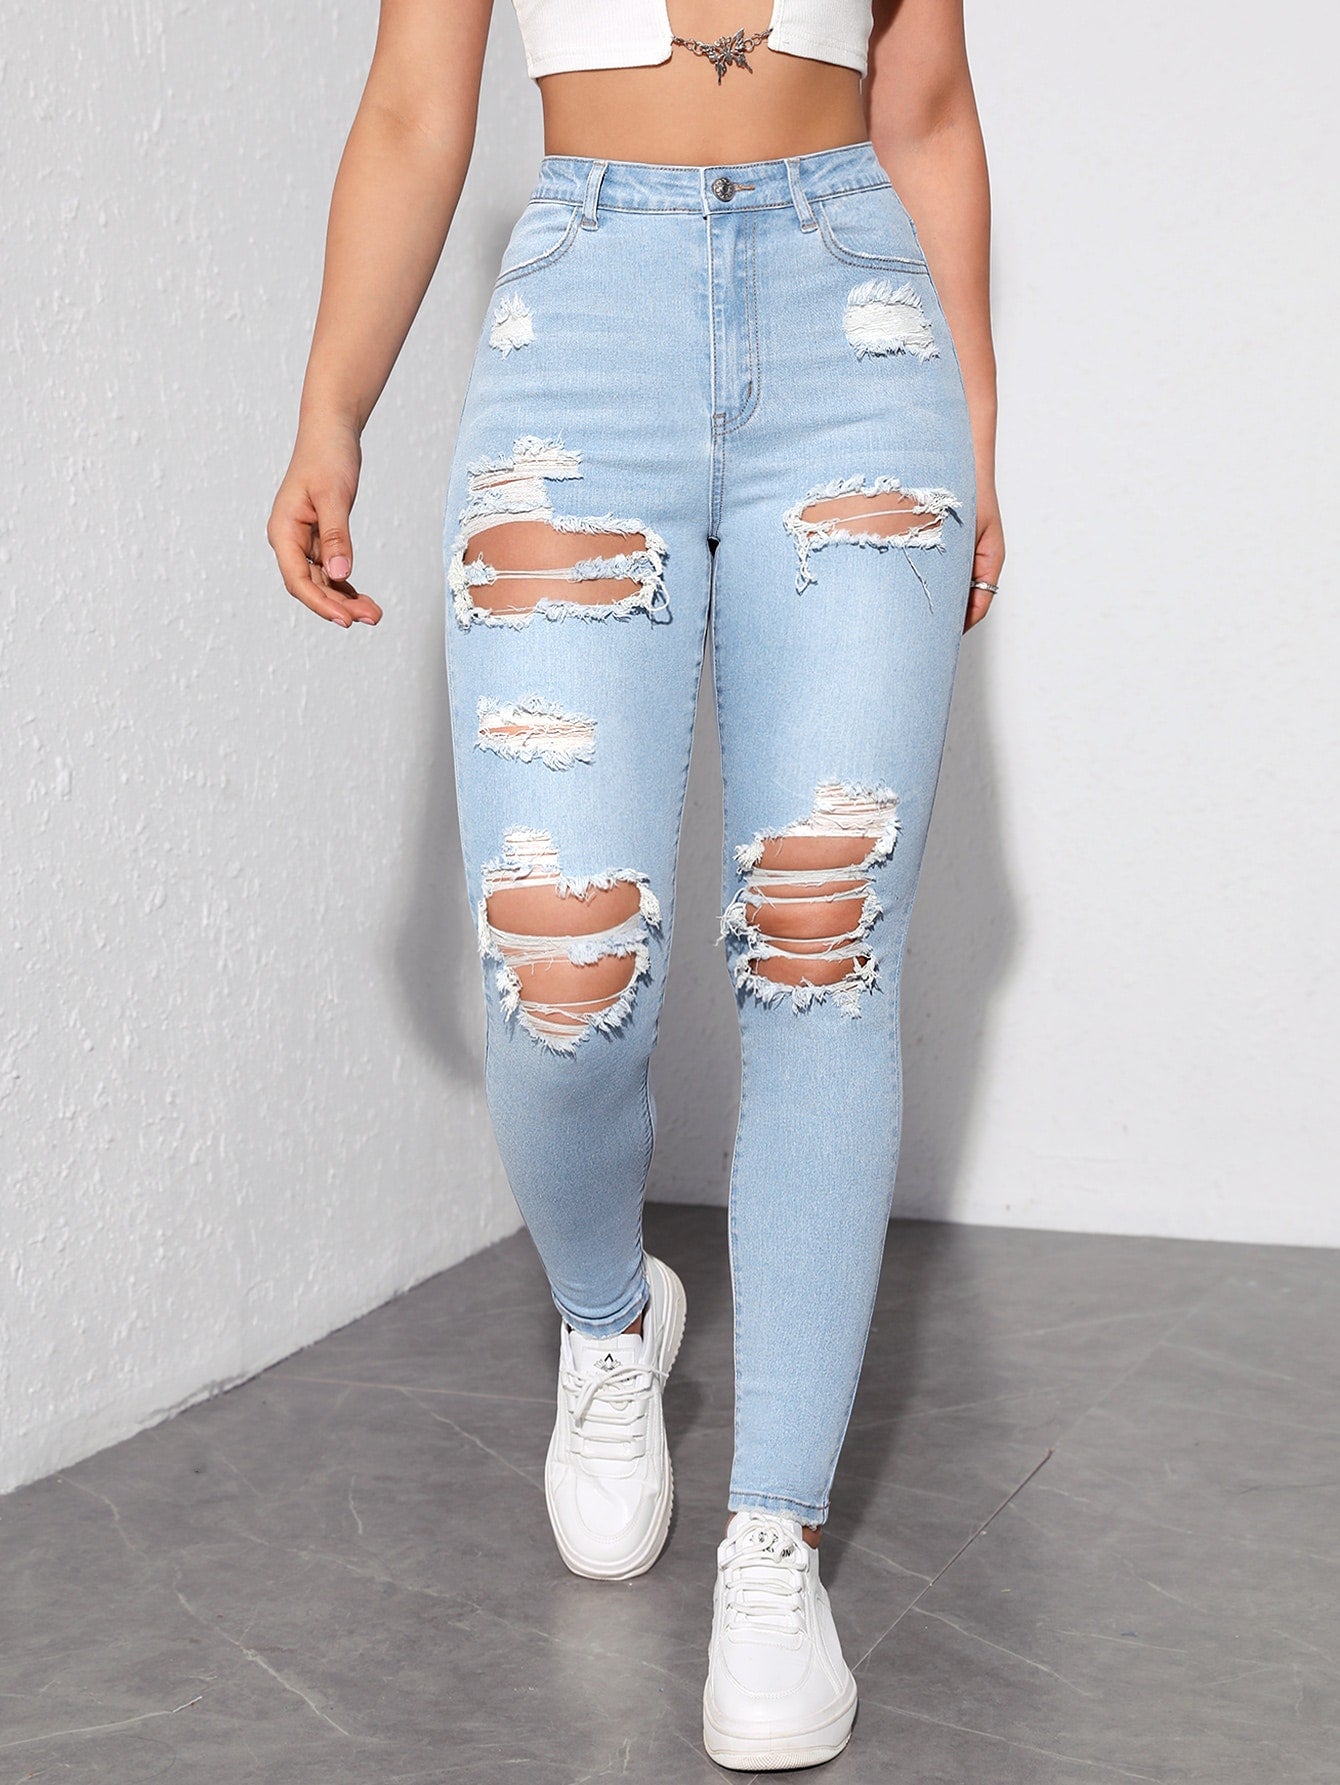 4 Ripped Jeans that Never Go Out of fashion | AEO Fashion Blogs